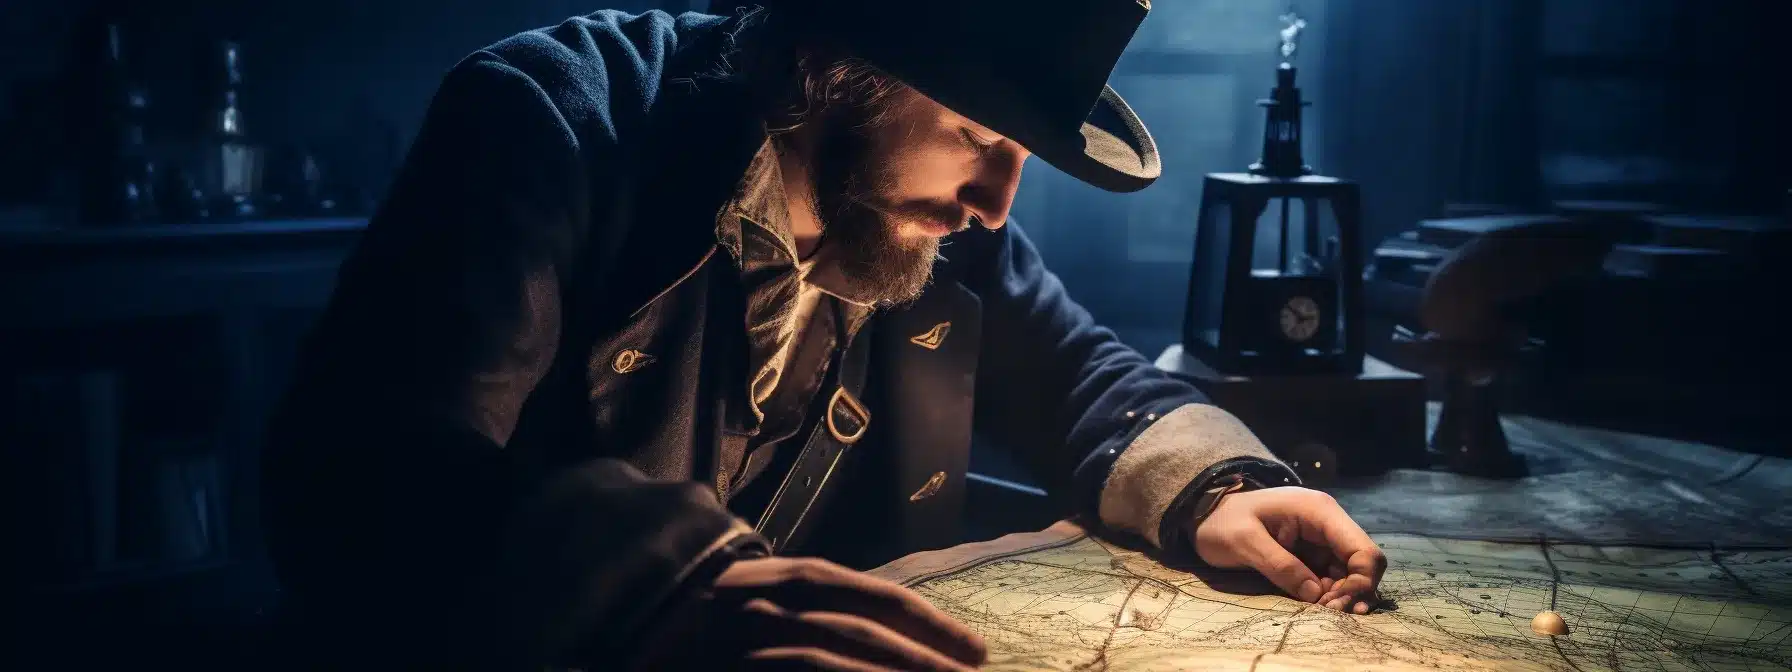 A Person Wearing A Captain'S Hat, Holding A Compass And Overlooking A Map With A Route Marked And A Sailing Ship Navigating Rough Waters.